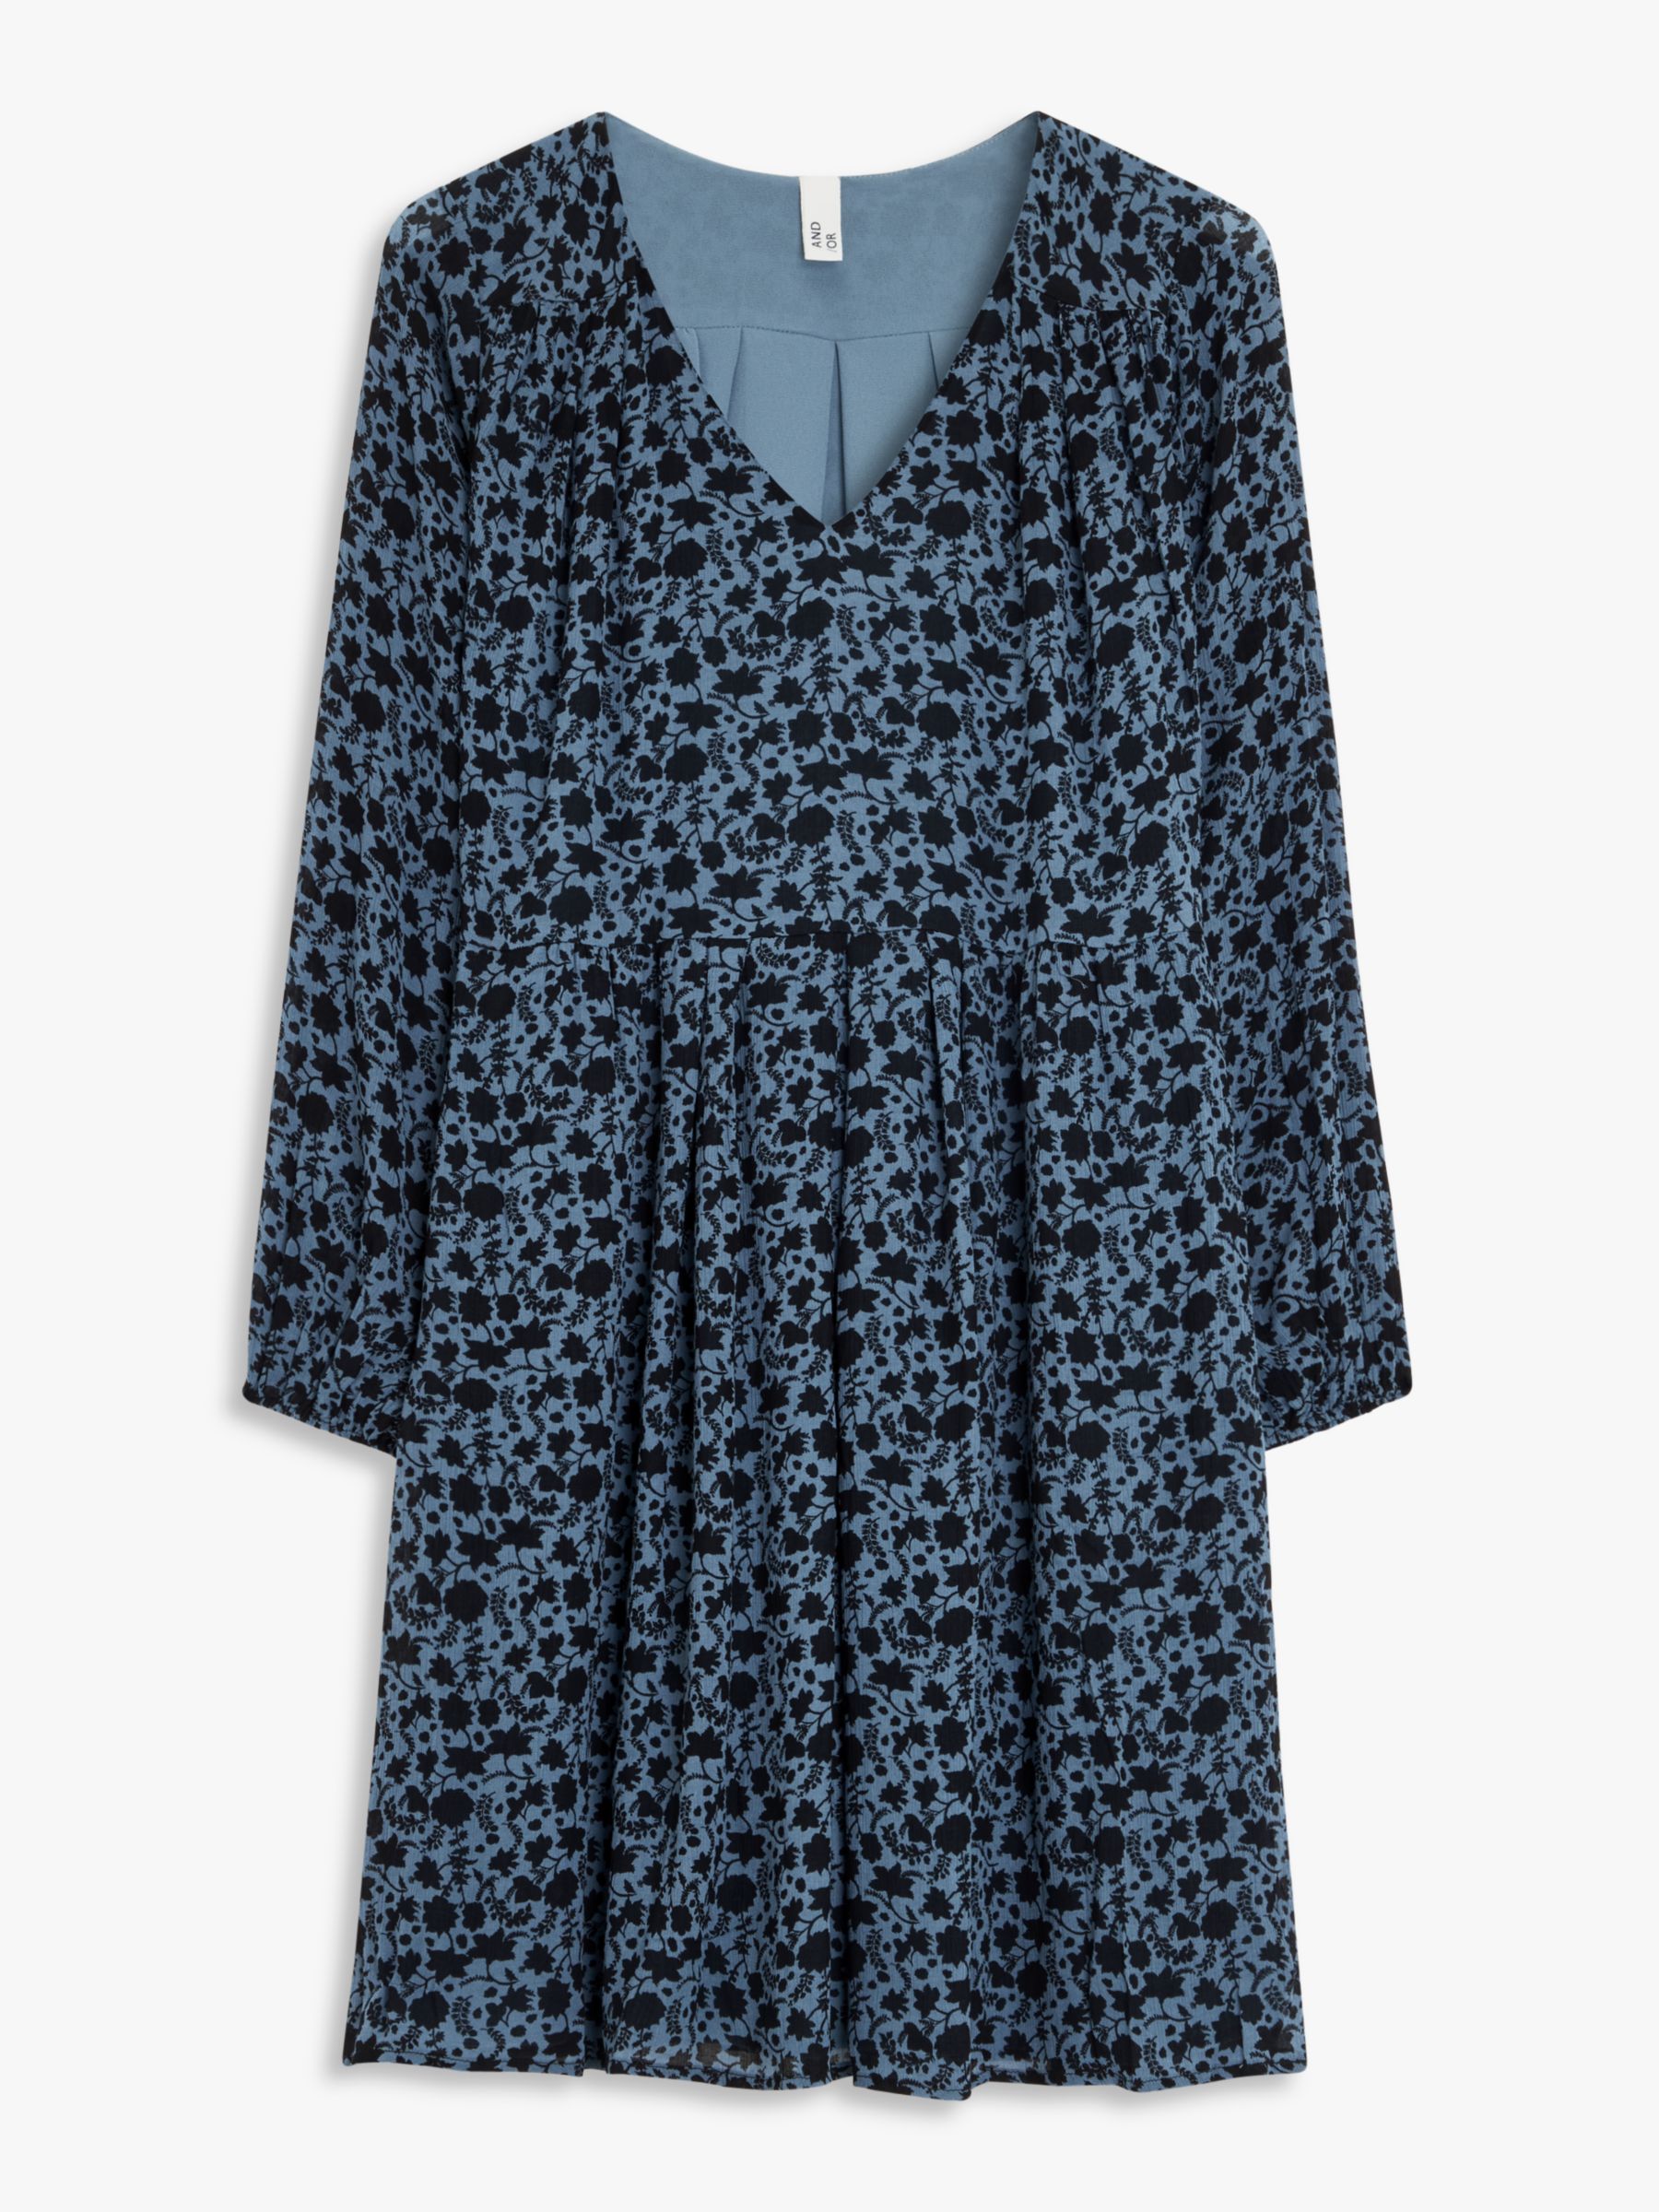 AND/OR Angie Foliage Dress, Blue/Multi at John Lewis & Partners